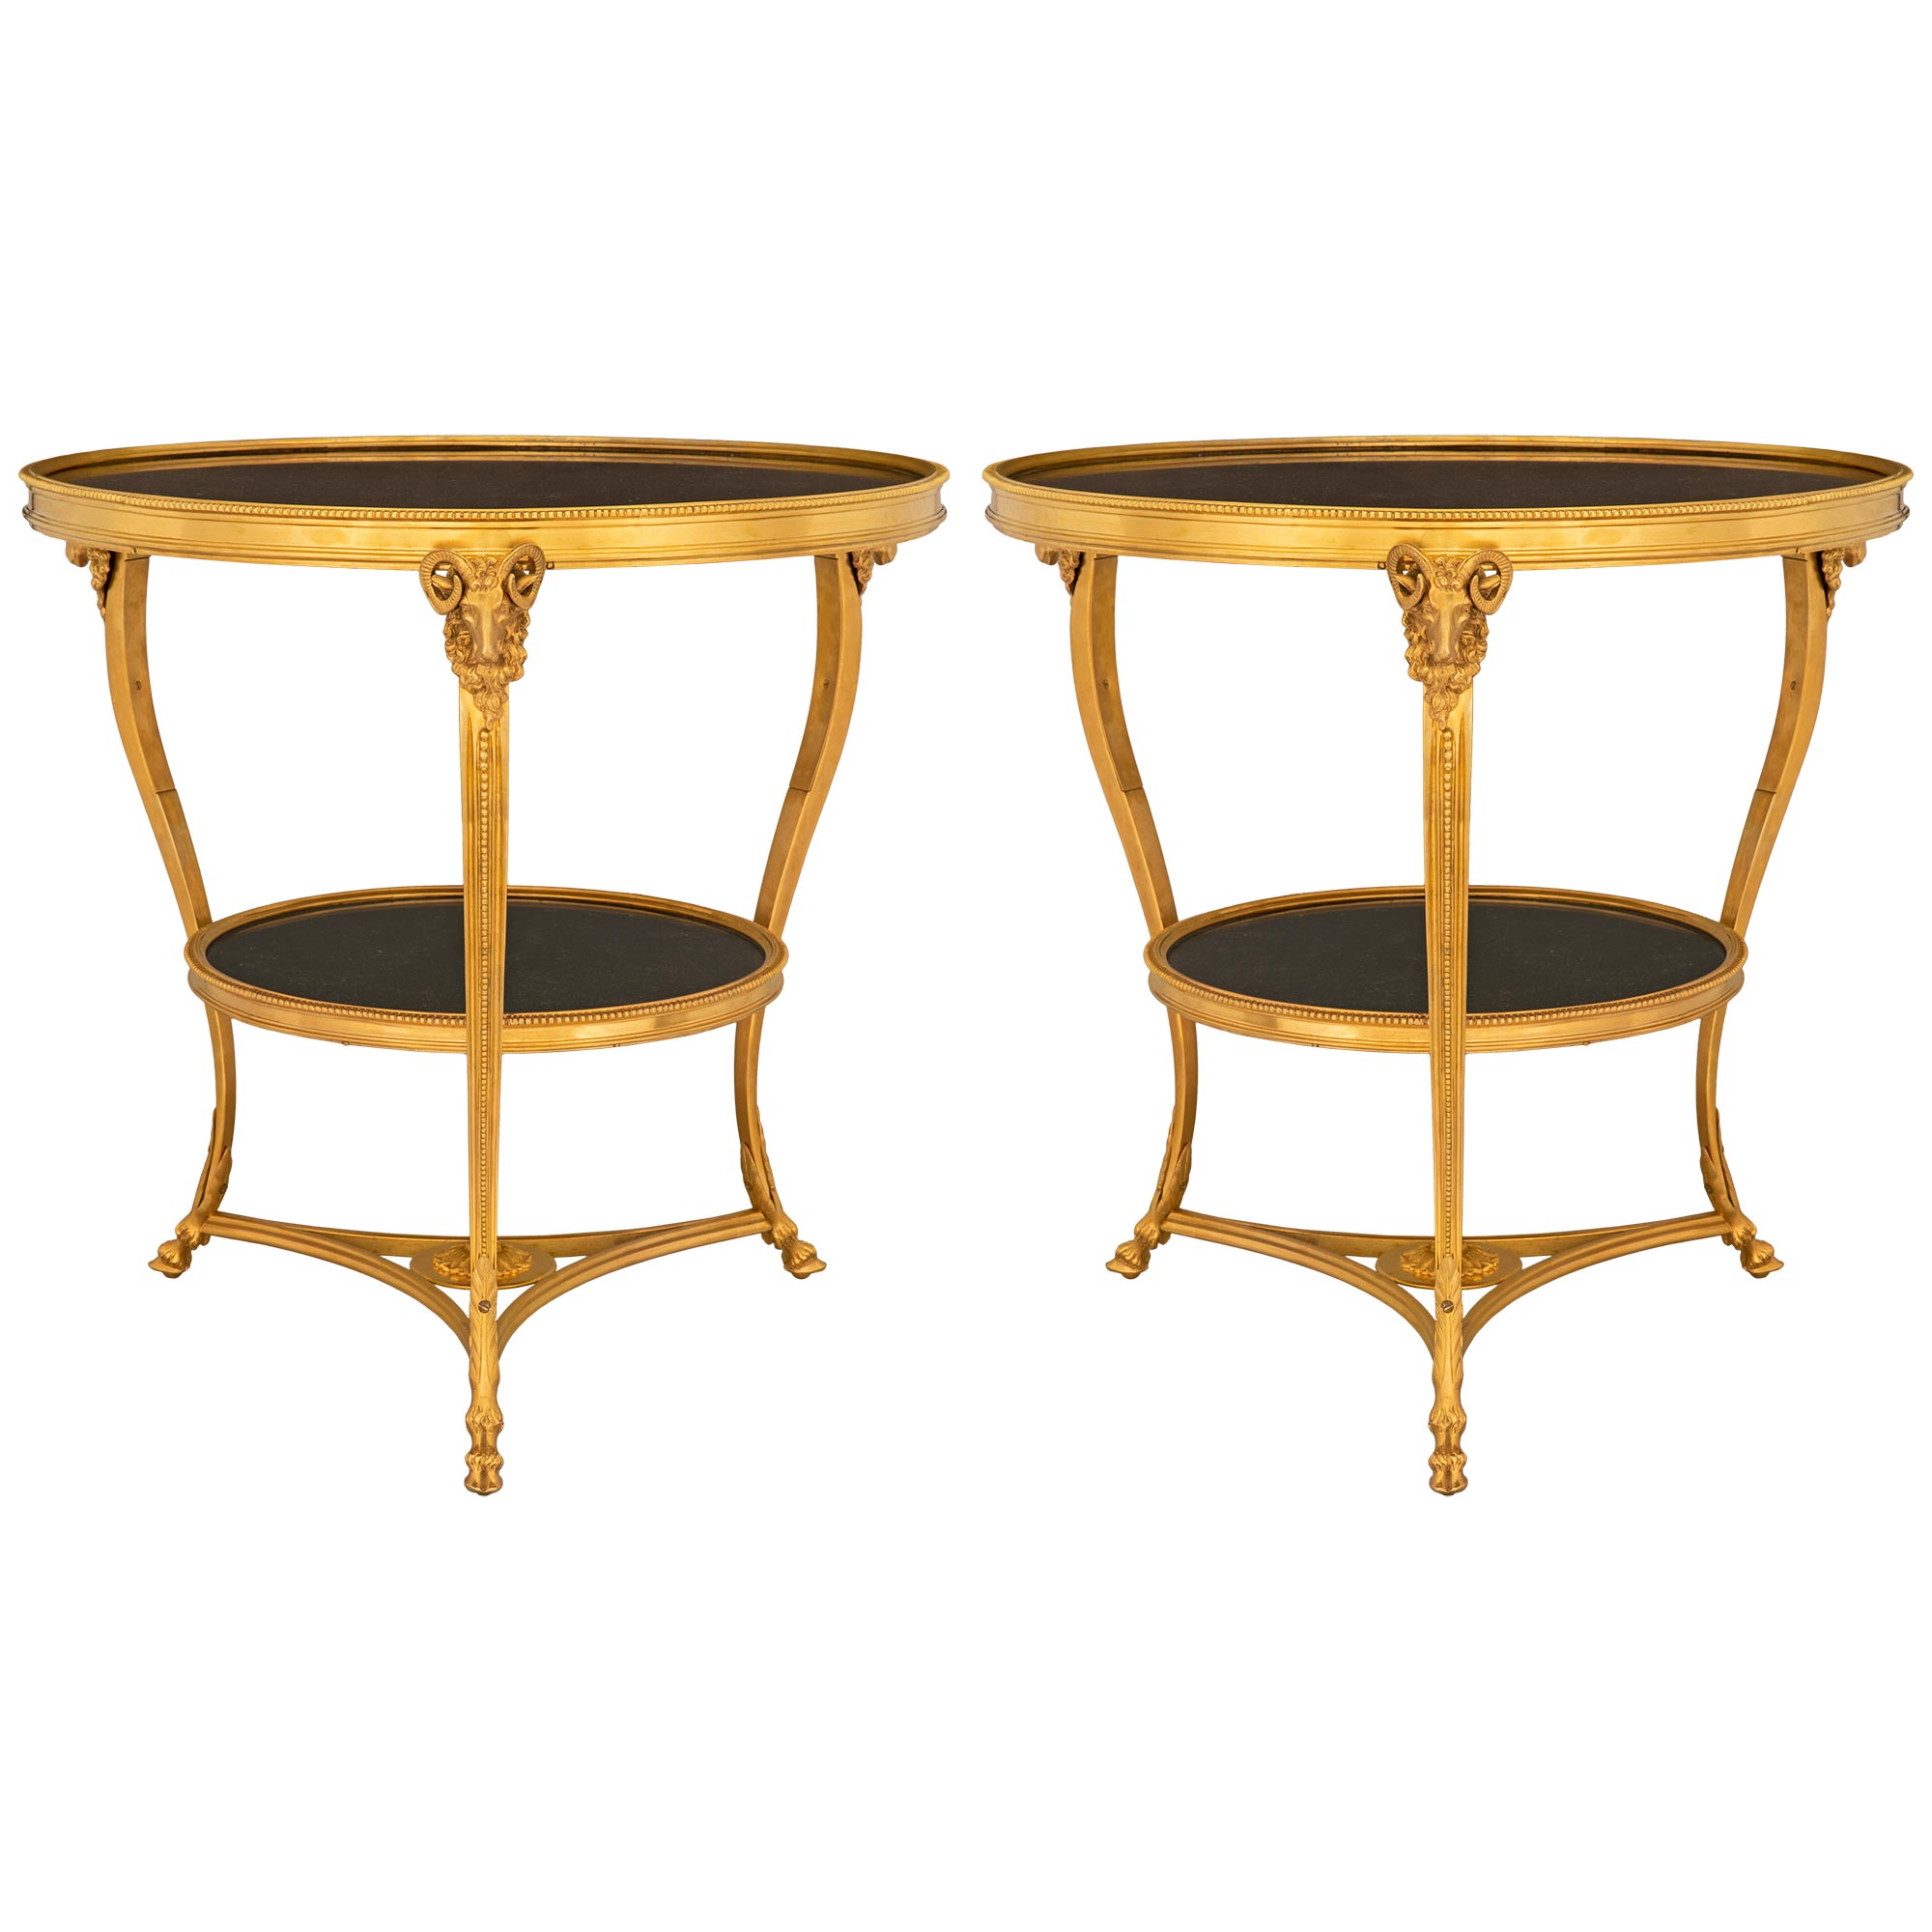 Pair of French 19th Century Louis XVI St. Marble & Ormolu Guéridon Side Table For Sale